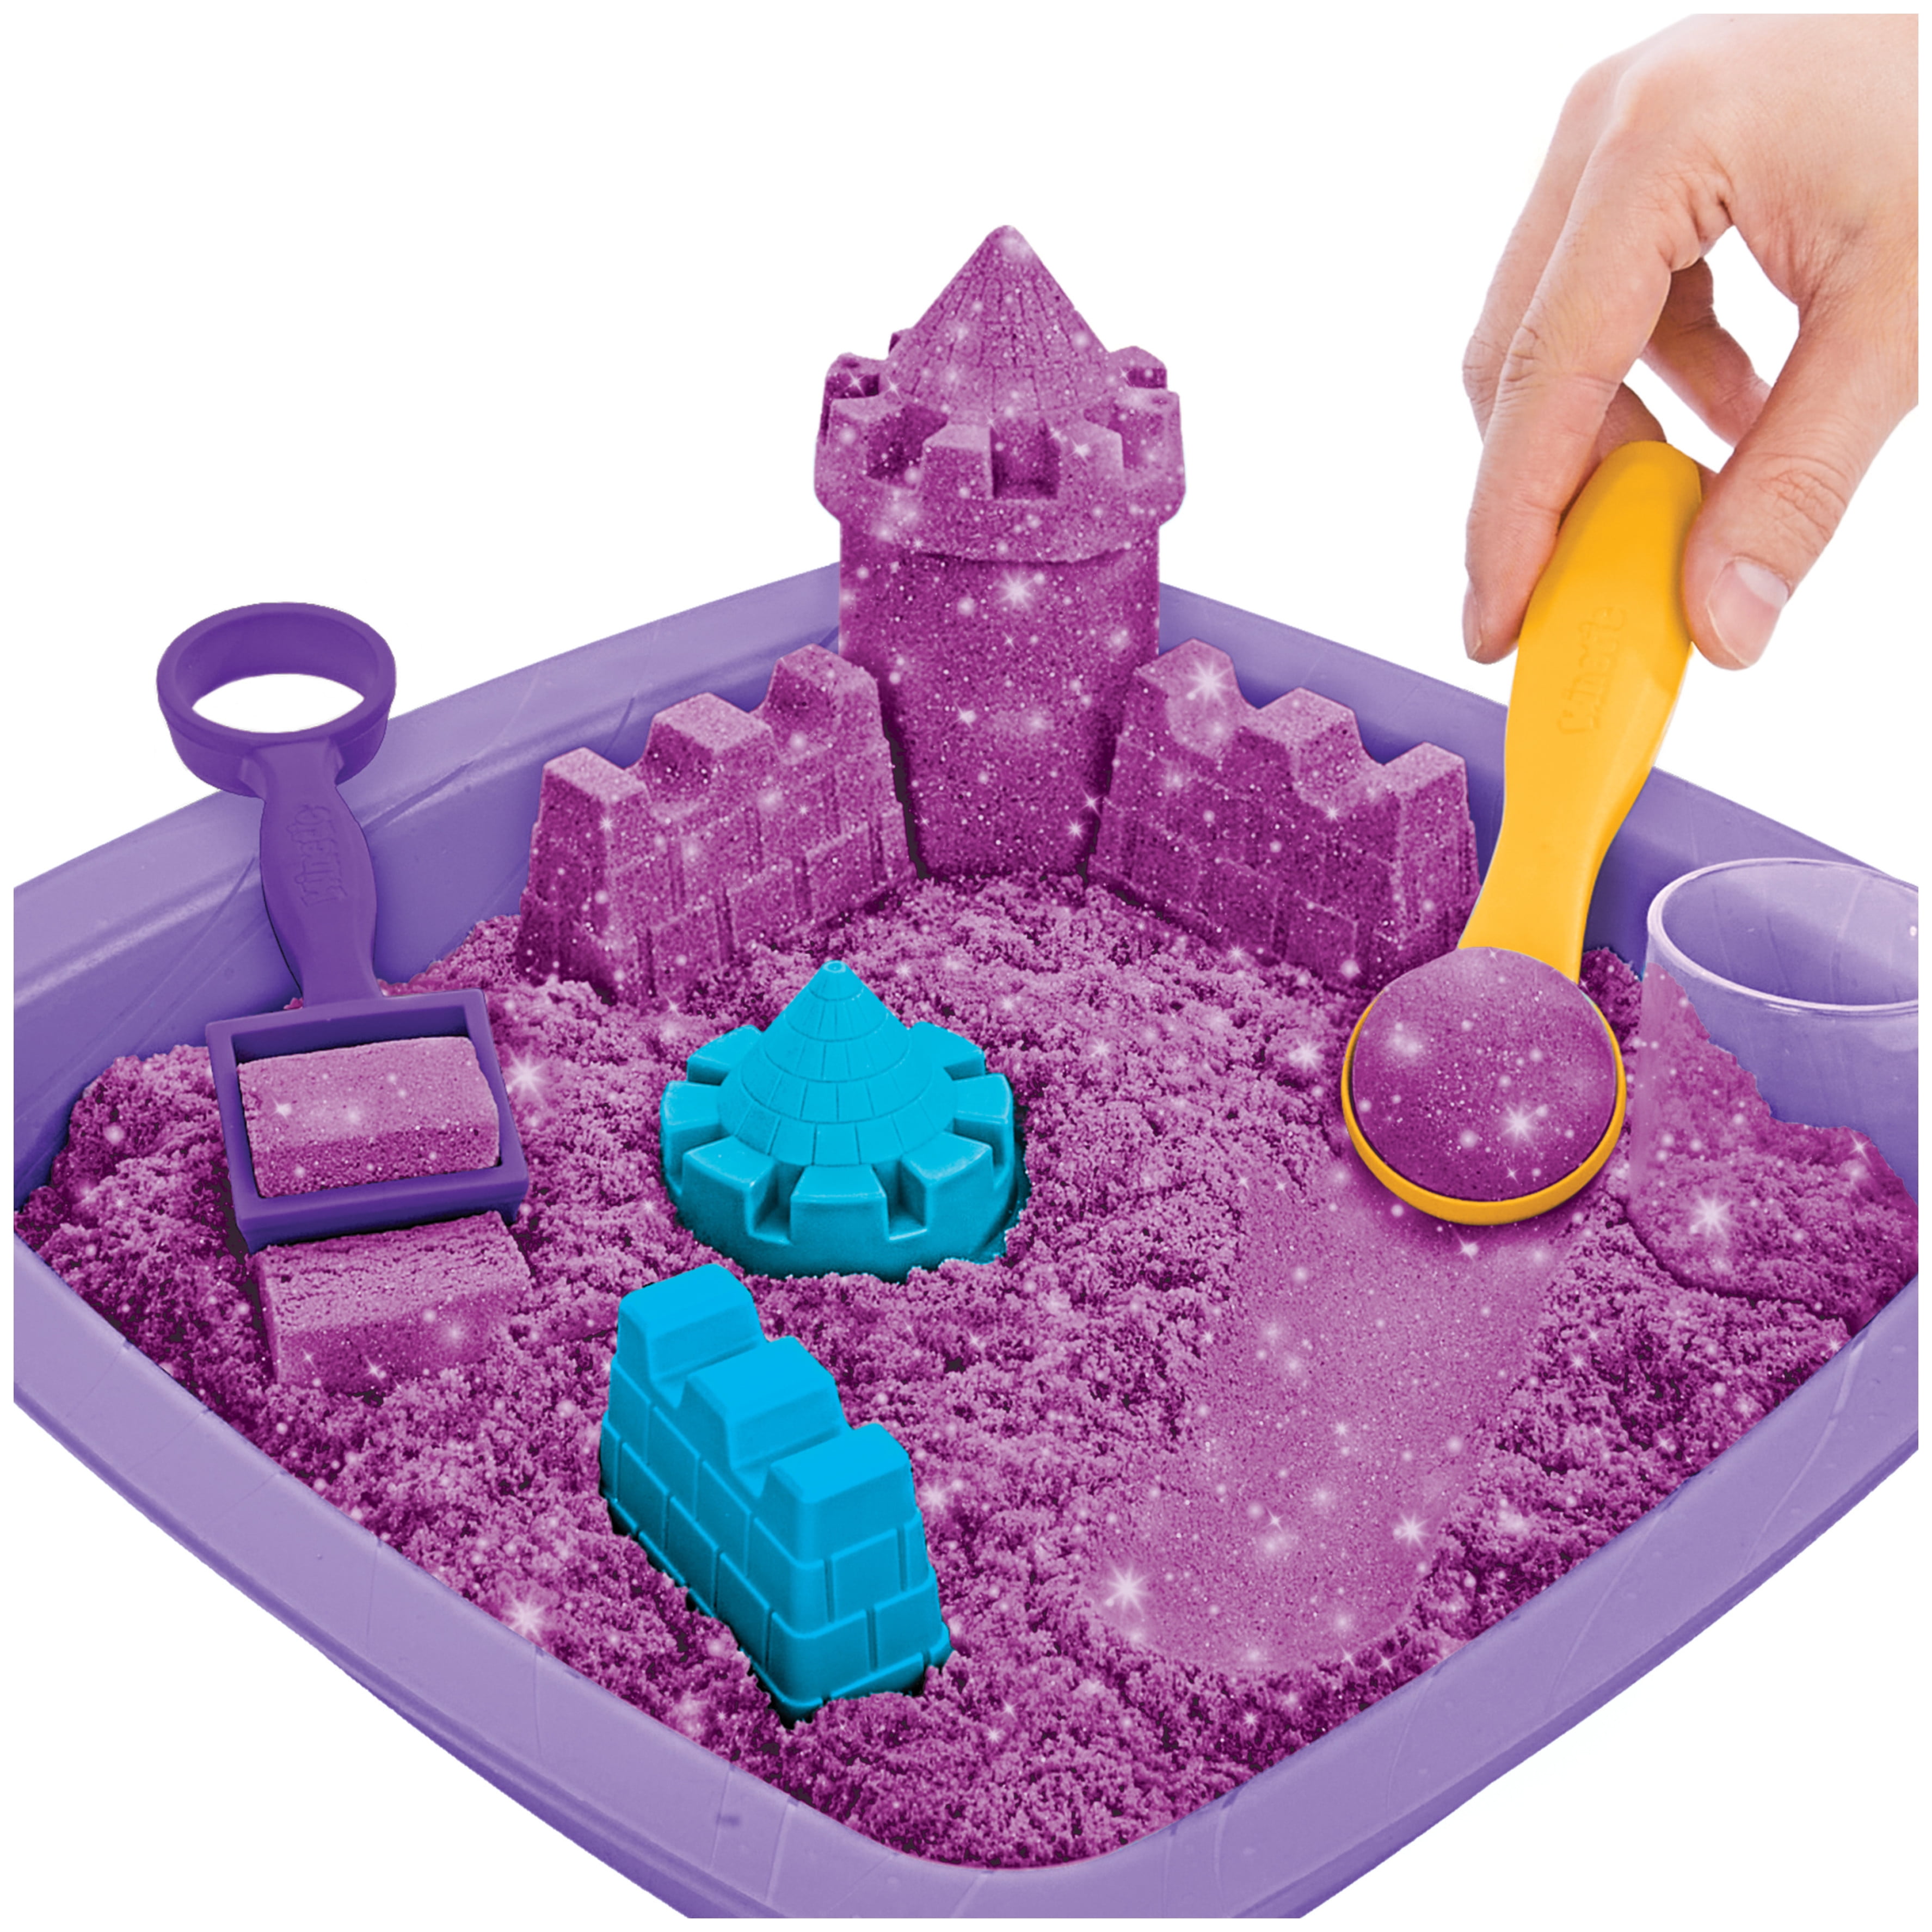  Kinetic Sand - Sandcastle Set with 1lb of Kinetic Sand and  Tools and Molds (Color May Vary) : Toys & Games